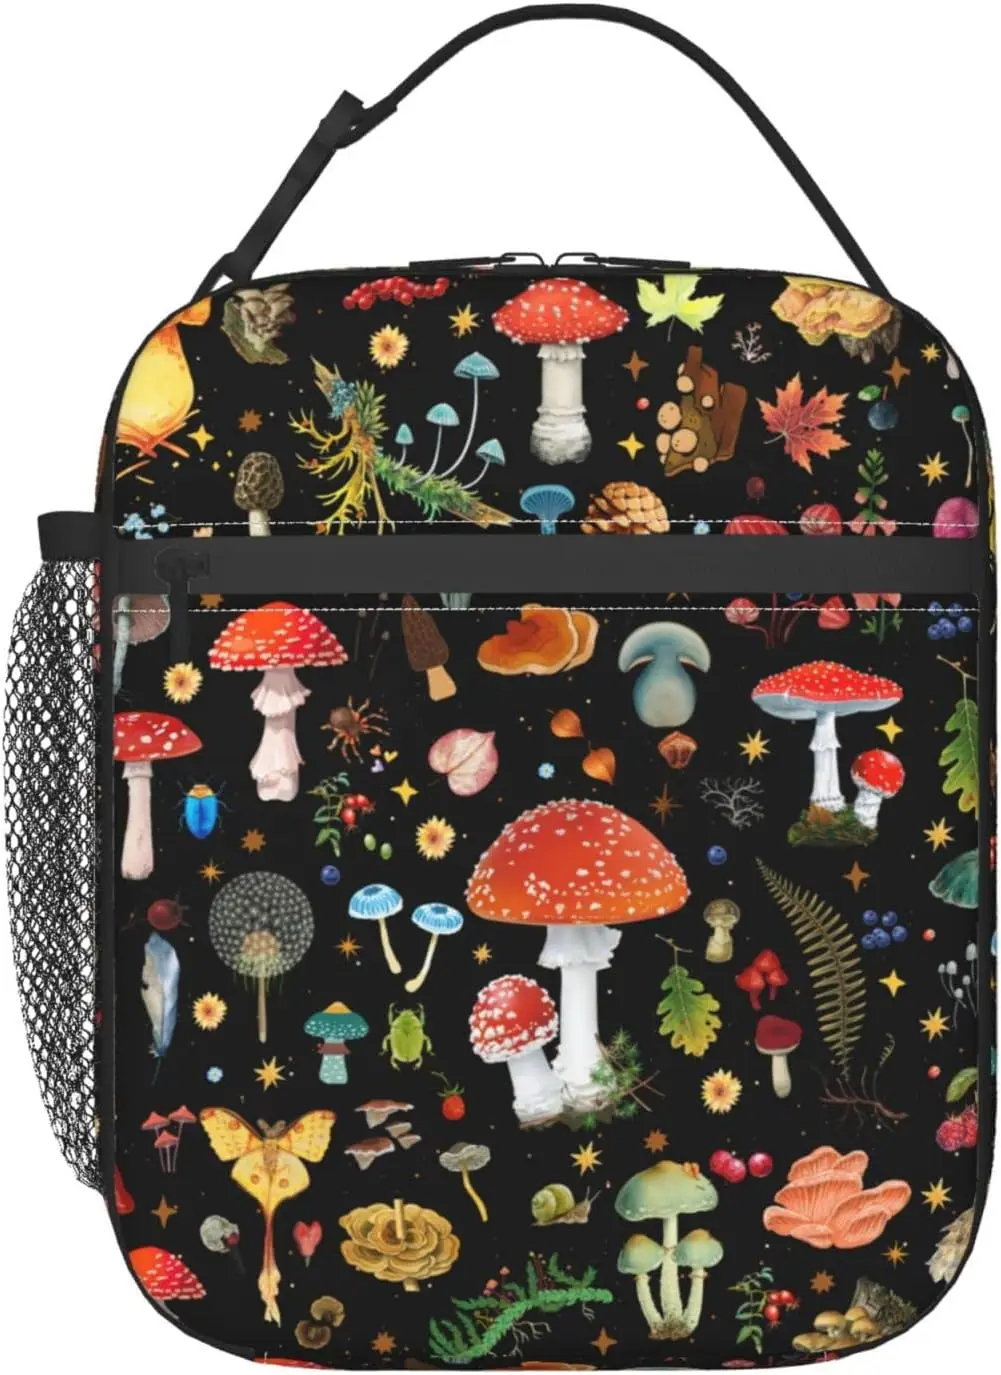 

Mushroom Lunch Bag Tote Bag Insulated Lunch Box For Picnic Beach Fishing Work Portable Lunch Bag For Women Men